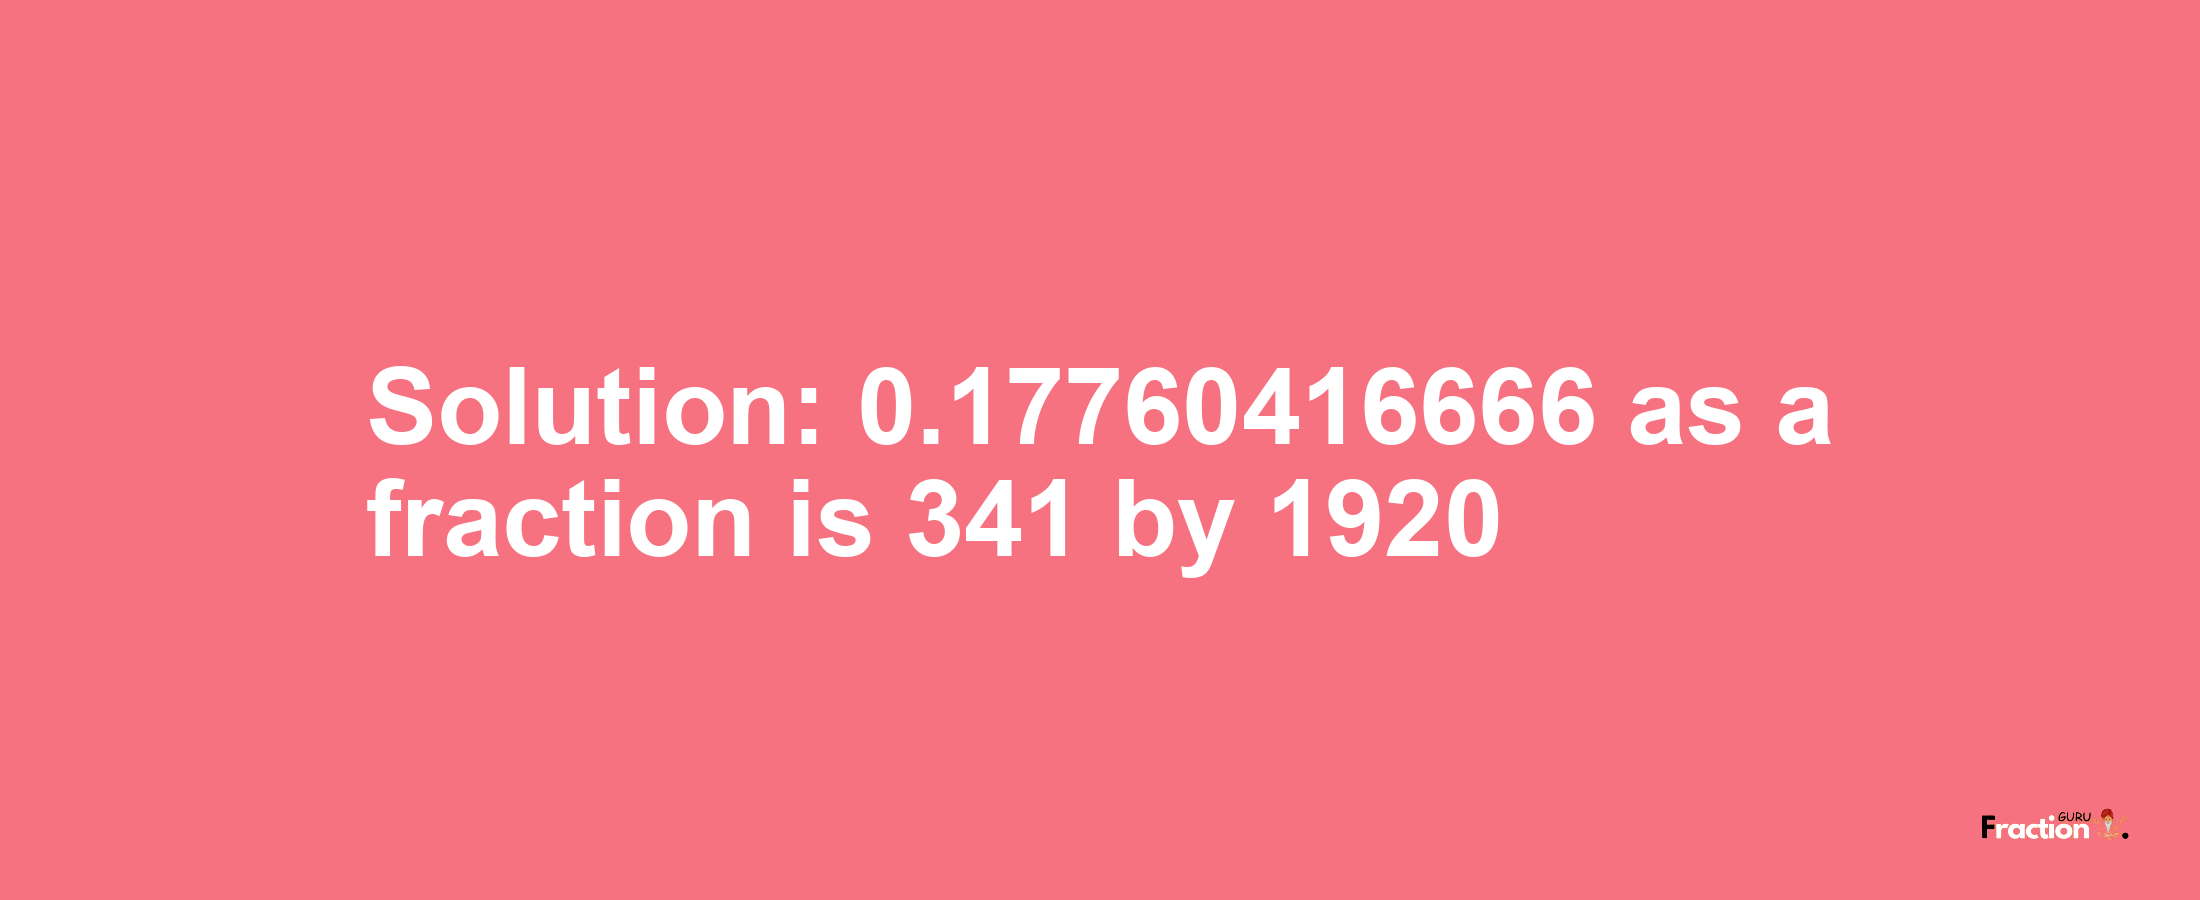 Solution:0.17760416666 as a fraction is 341/1920